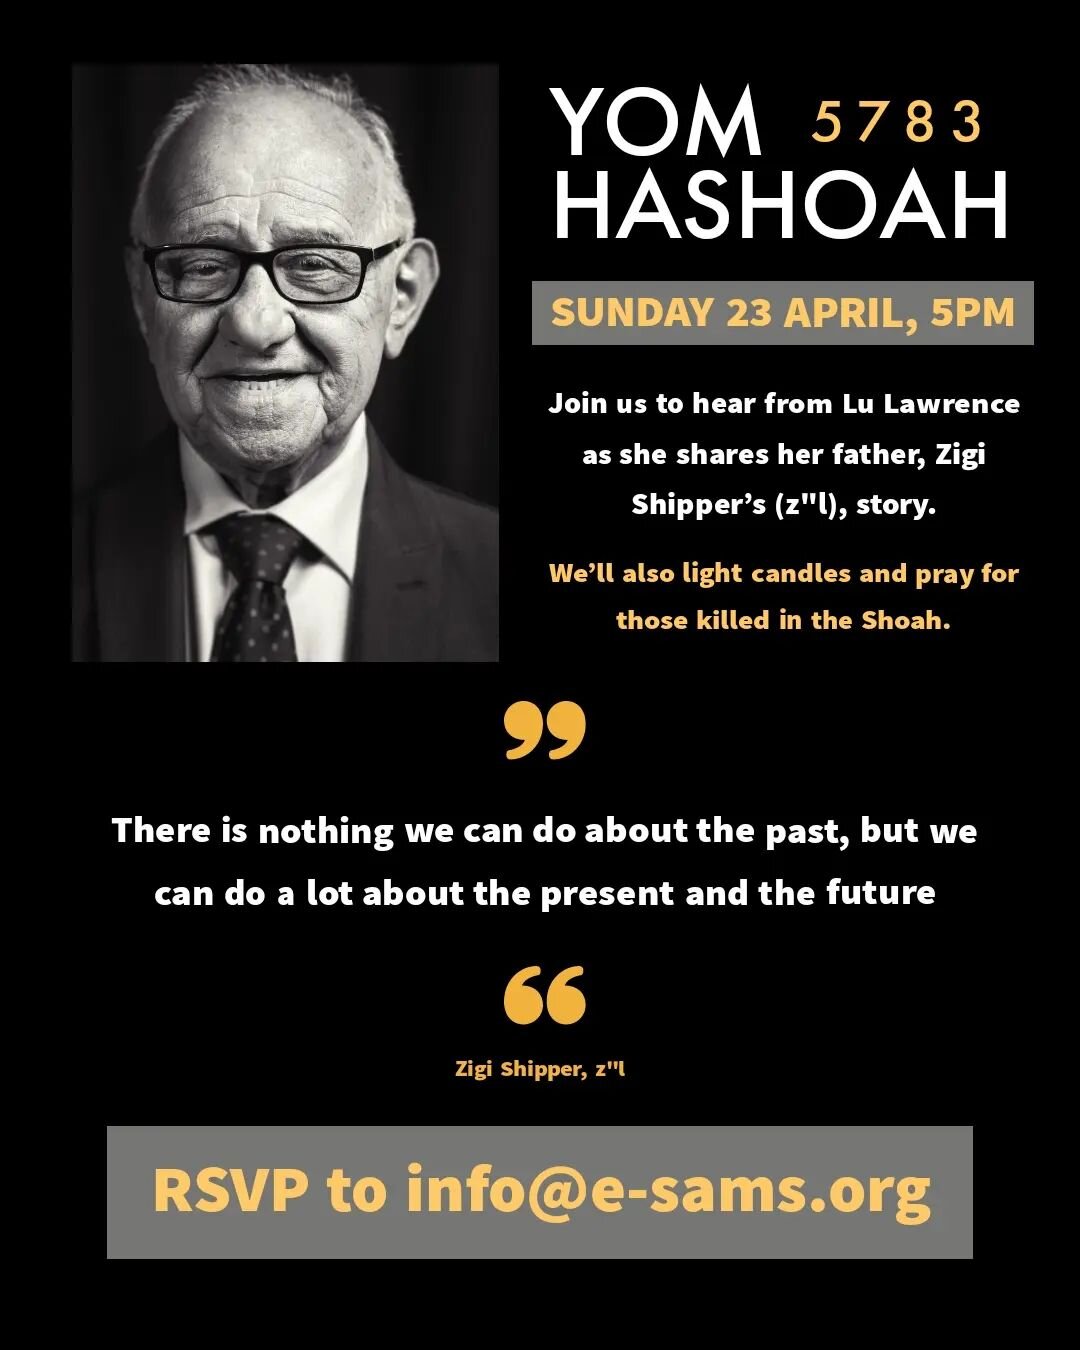 Please join us next Sunday as we mark Yom haShoah at SAMS. Please RSVP if you plan to come. 🕯️